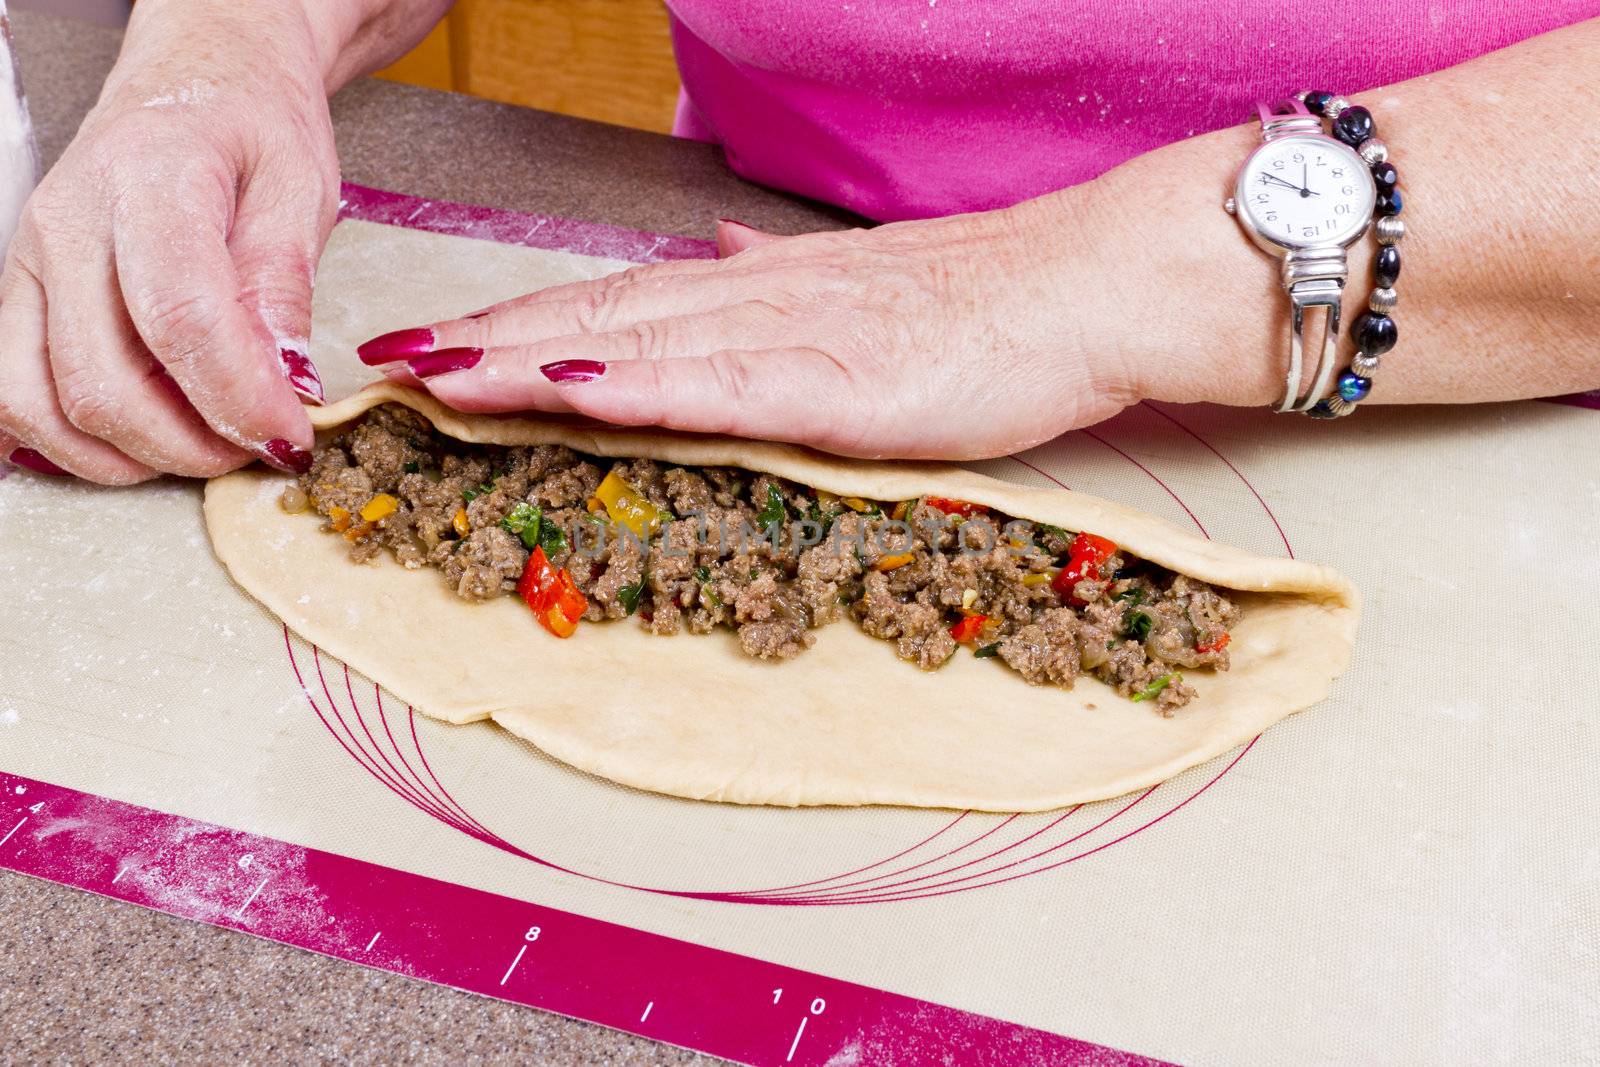 Experienced Hands are wrapping Turkish traditional food Pide with seasoned ground beef.